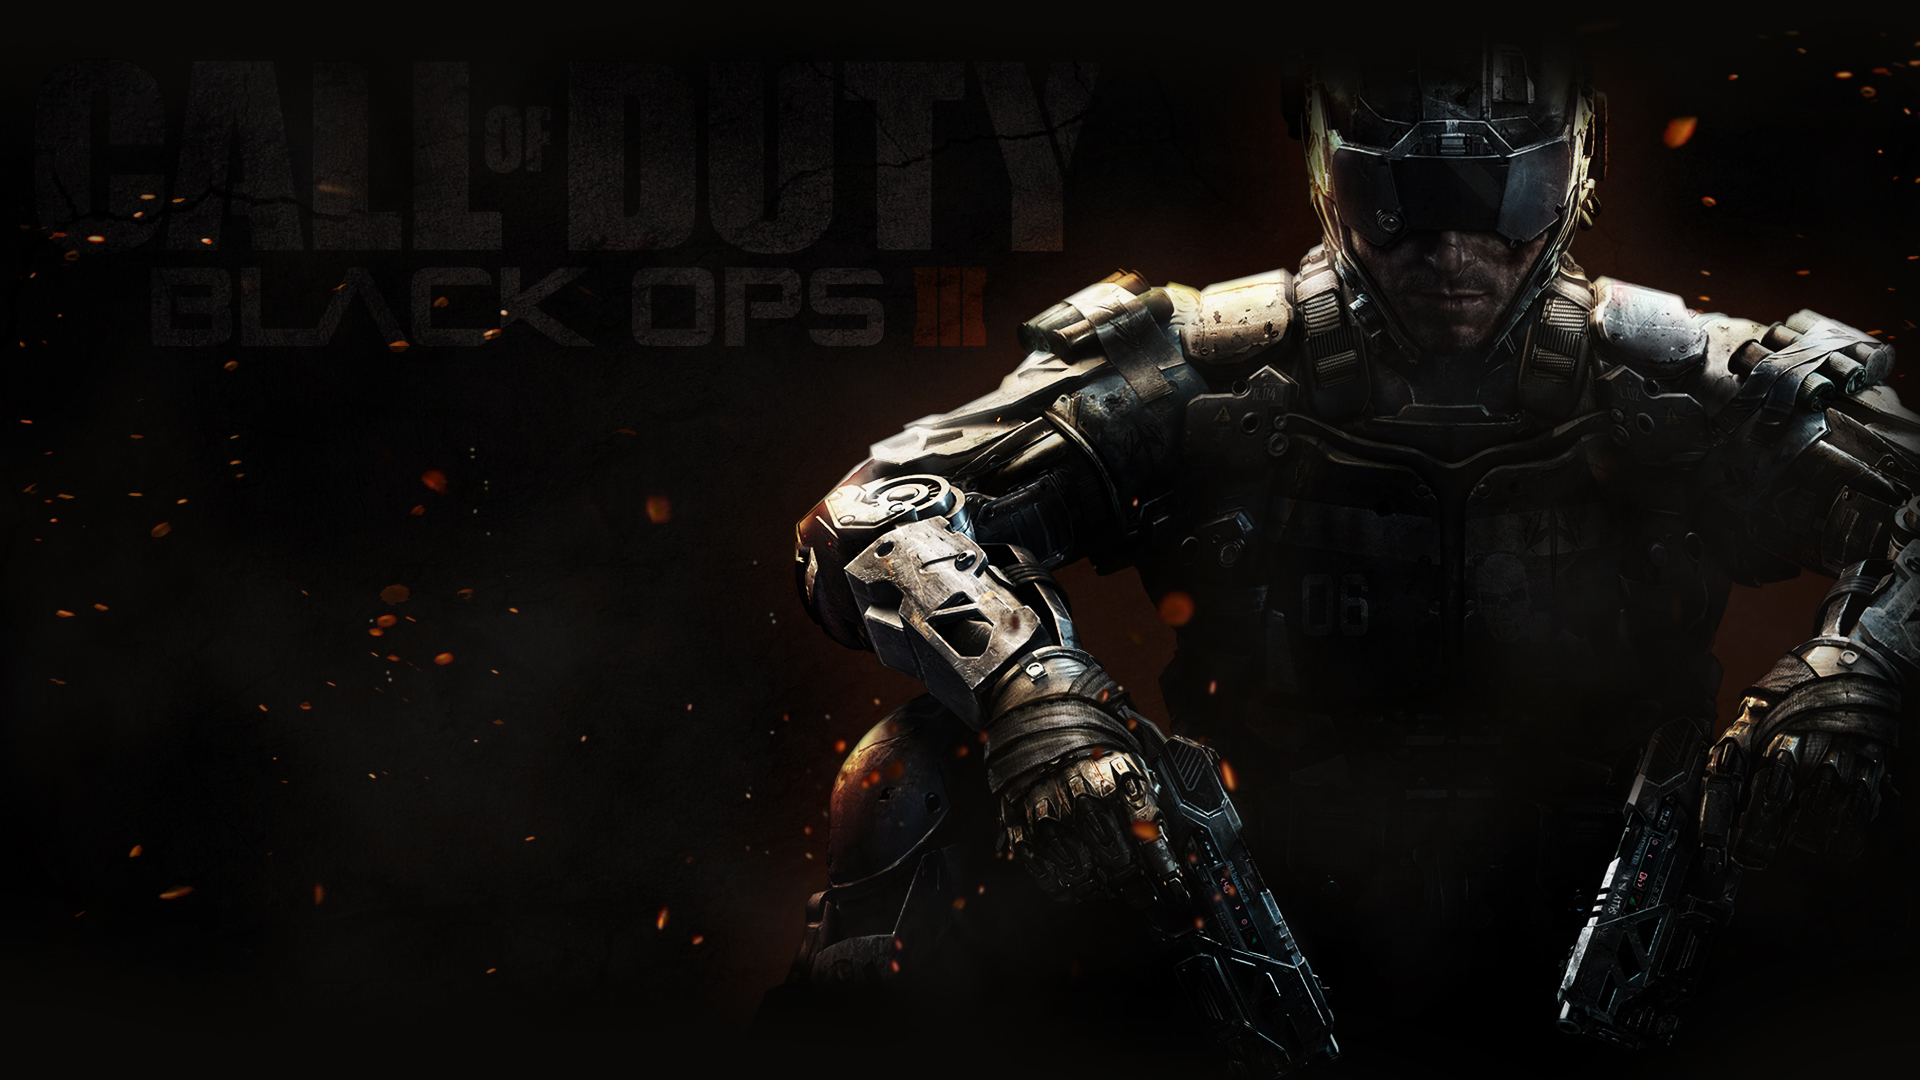 call of duty  black ops 3 wallpaper 01 by toby affenbude d8qzd19jpg 1920x1080